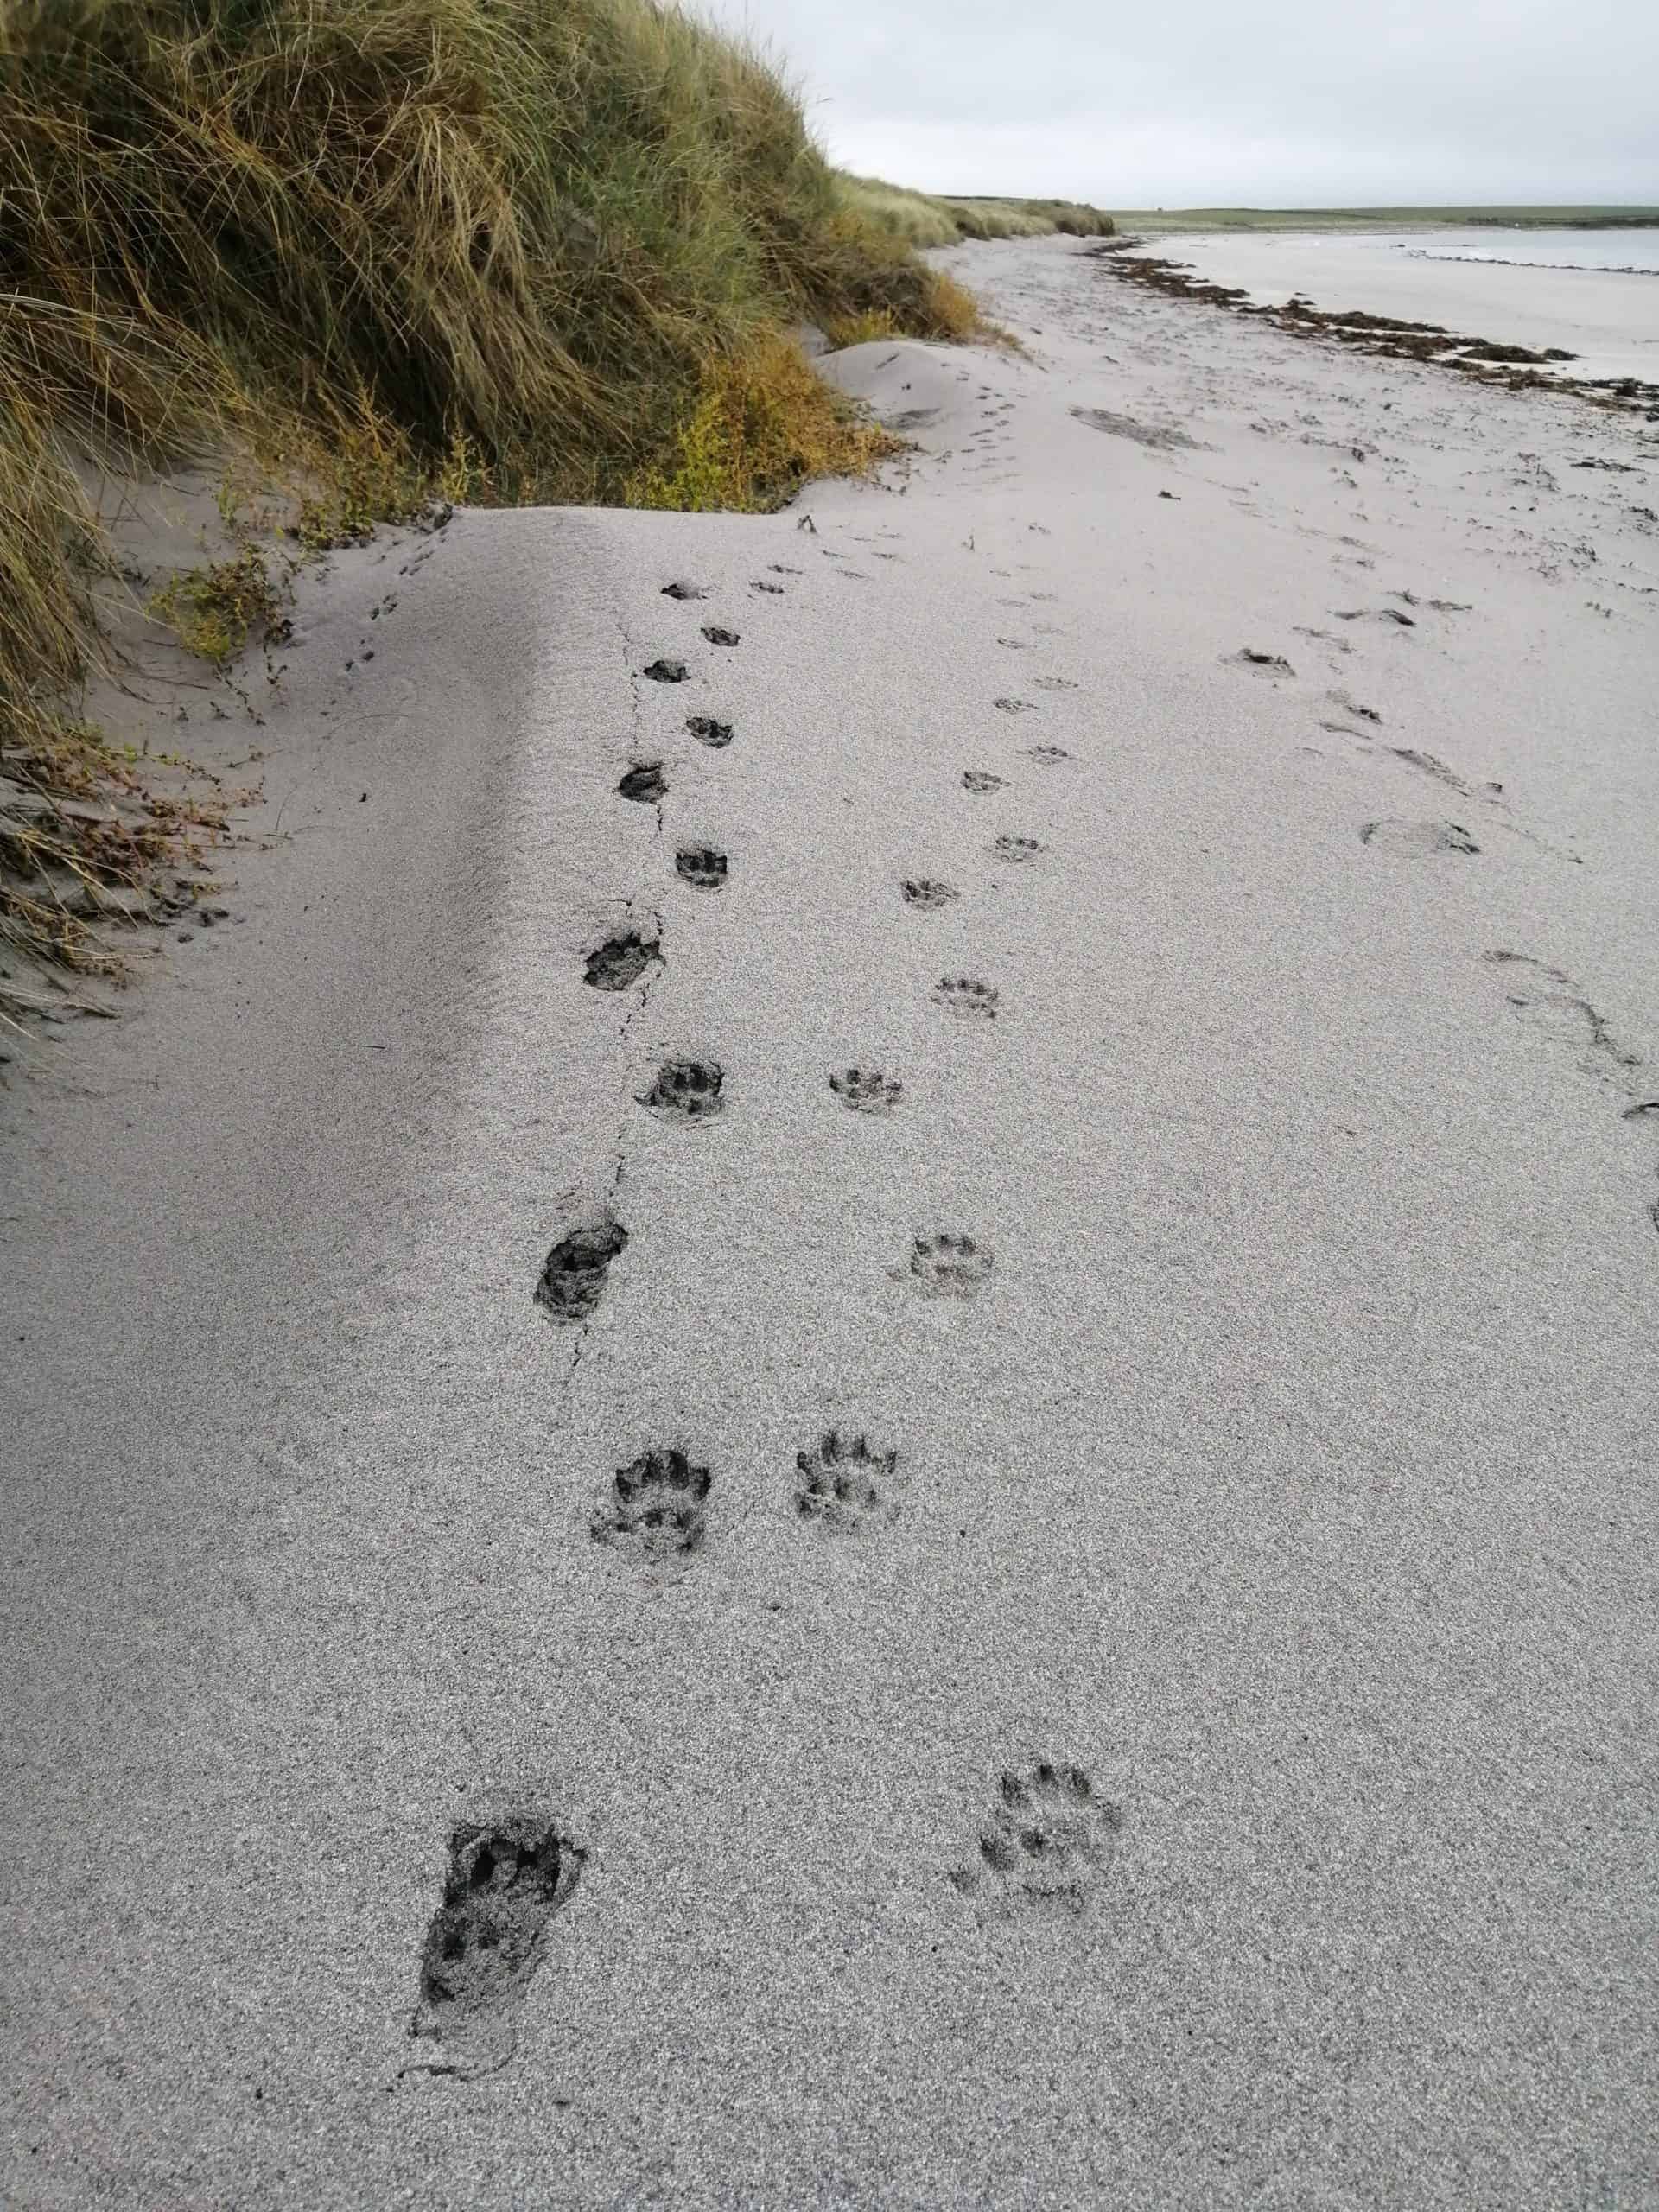 Otter tracks in the sand. Photo by David Wege.